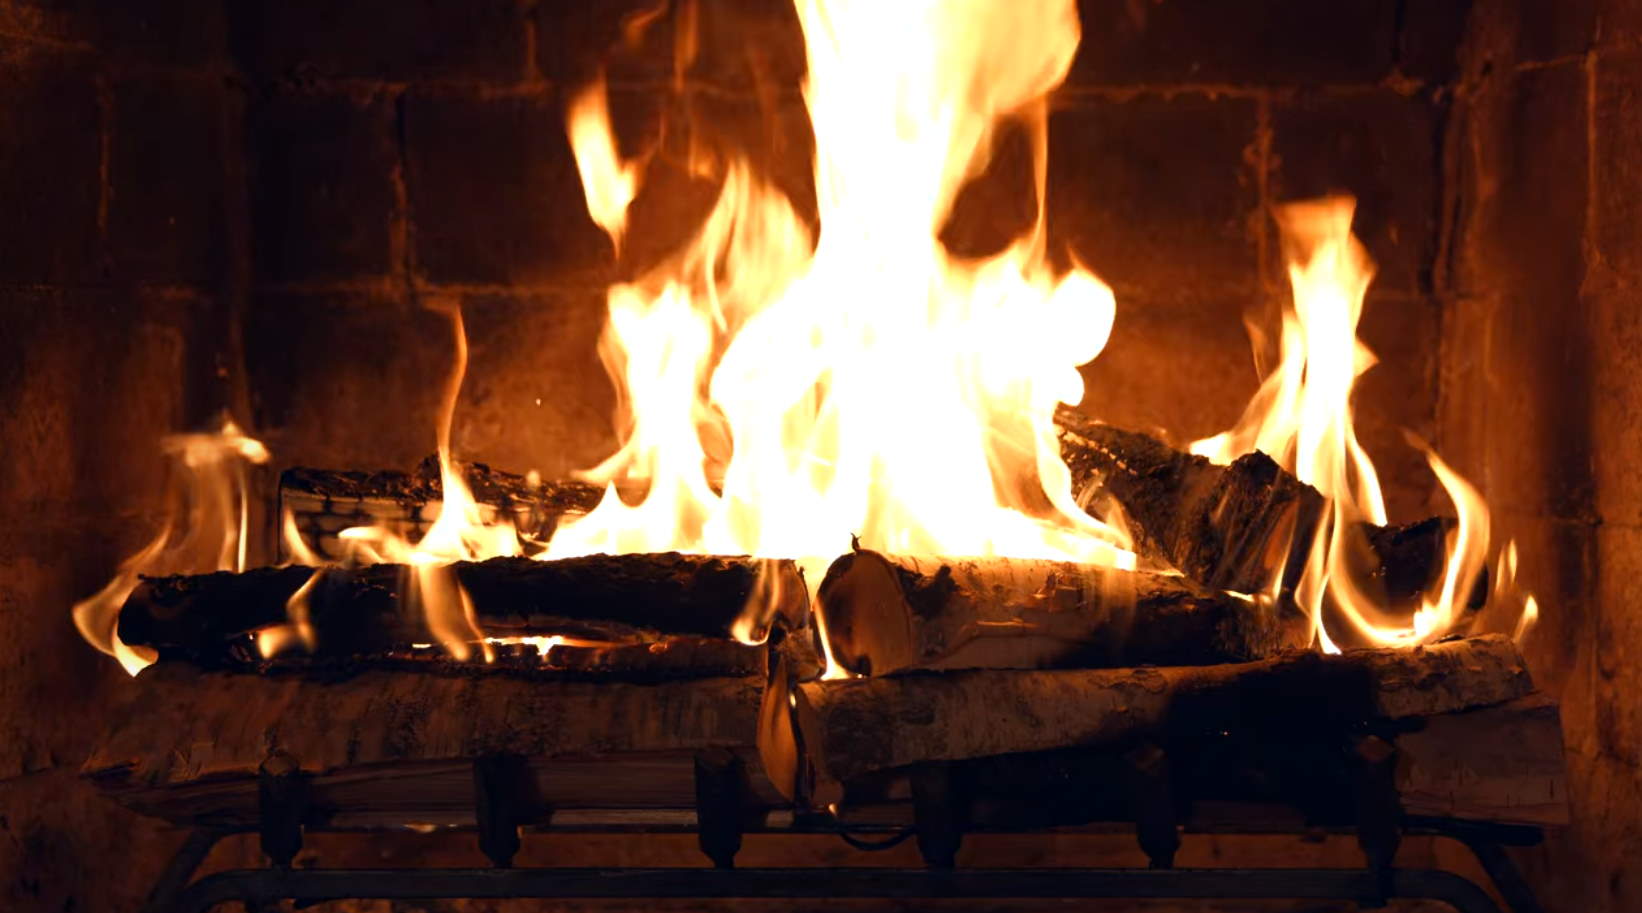 Directv Channel Fureplace - 4k Yule Log Fireplace With ...